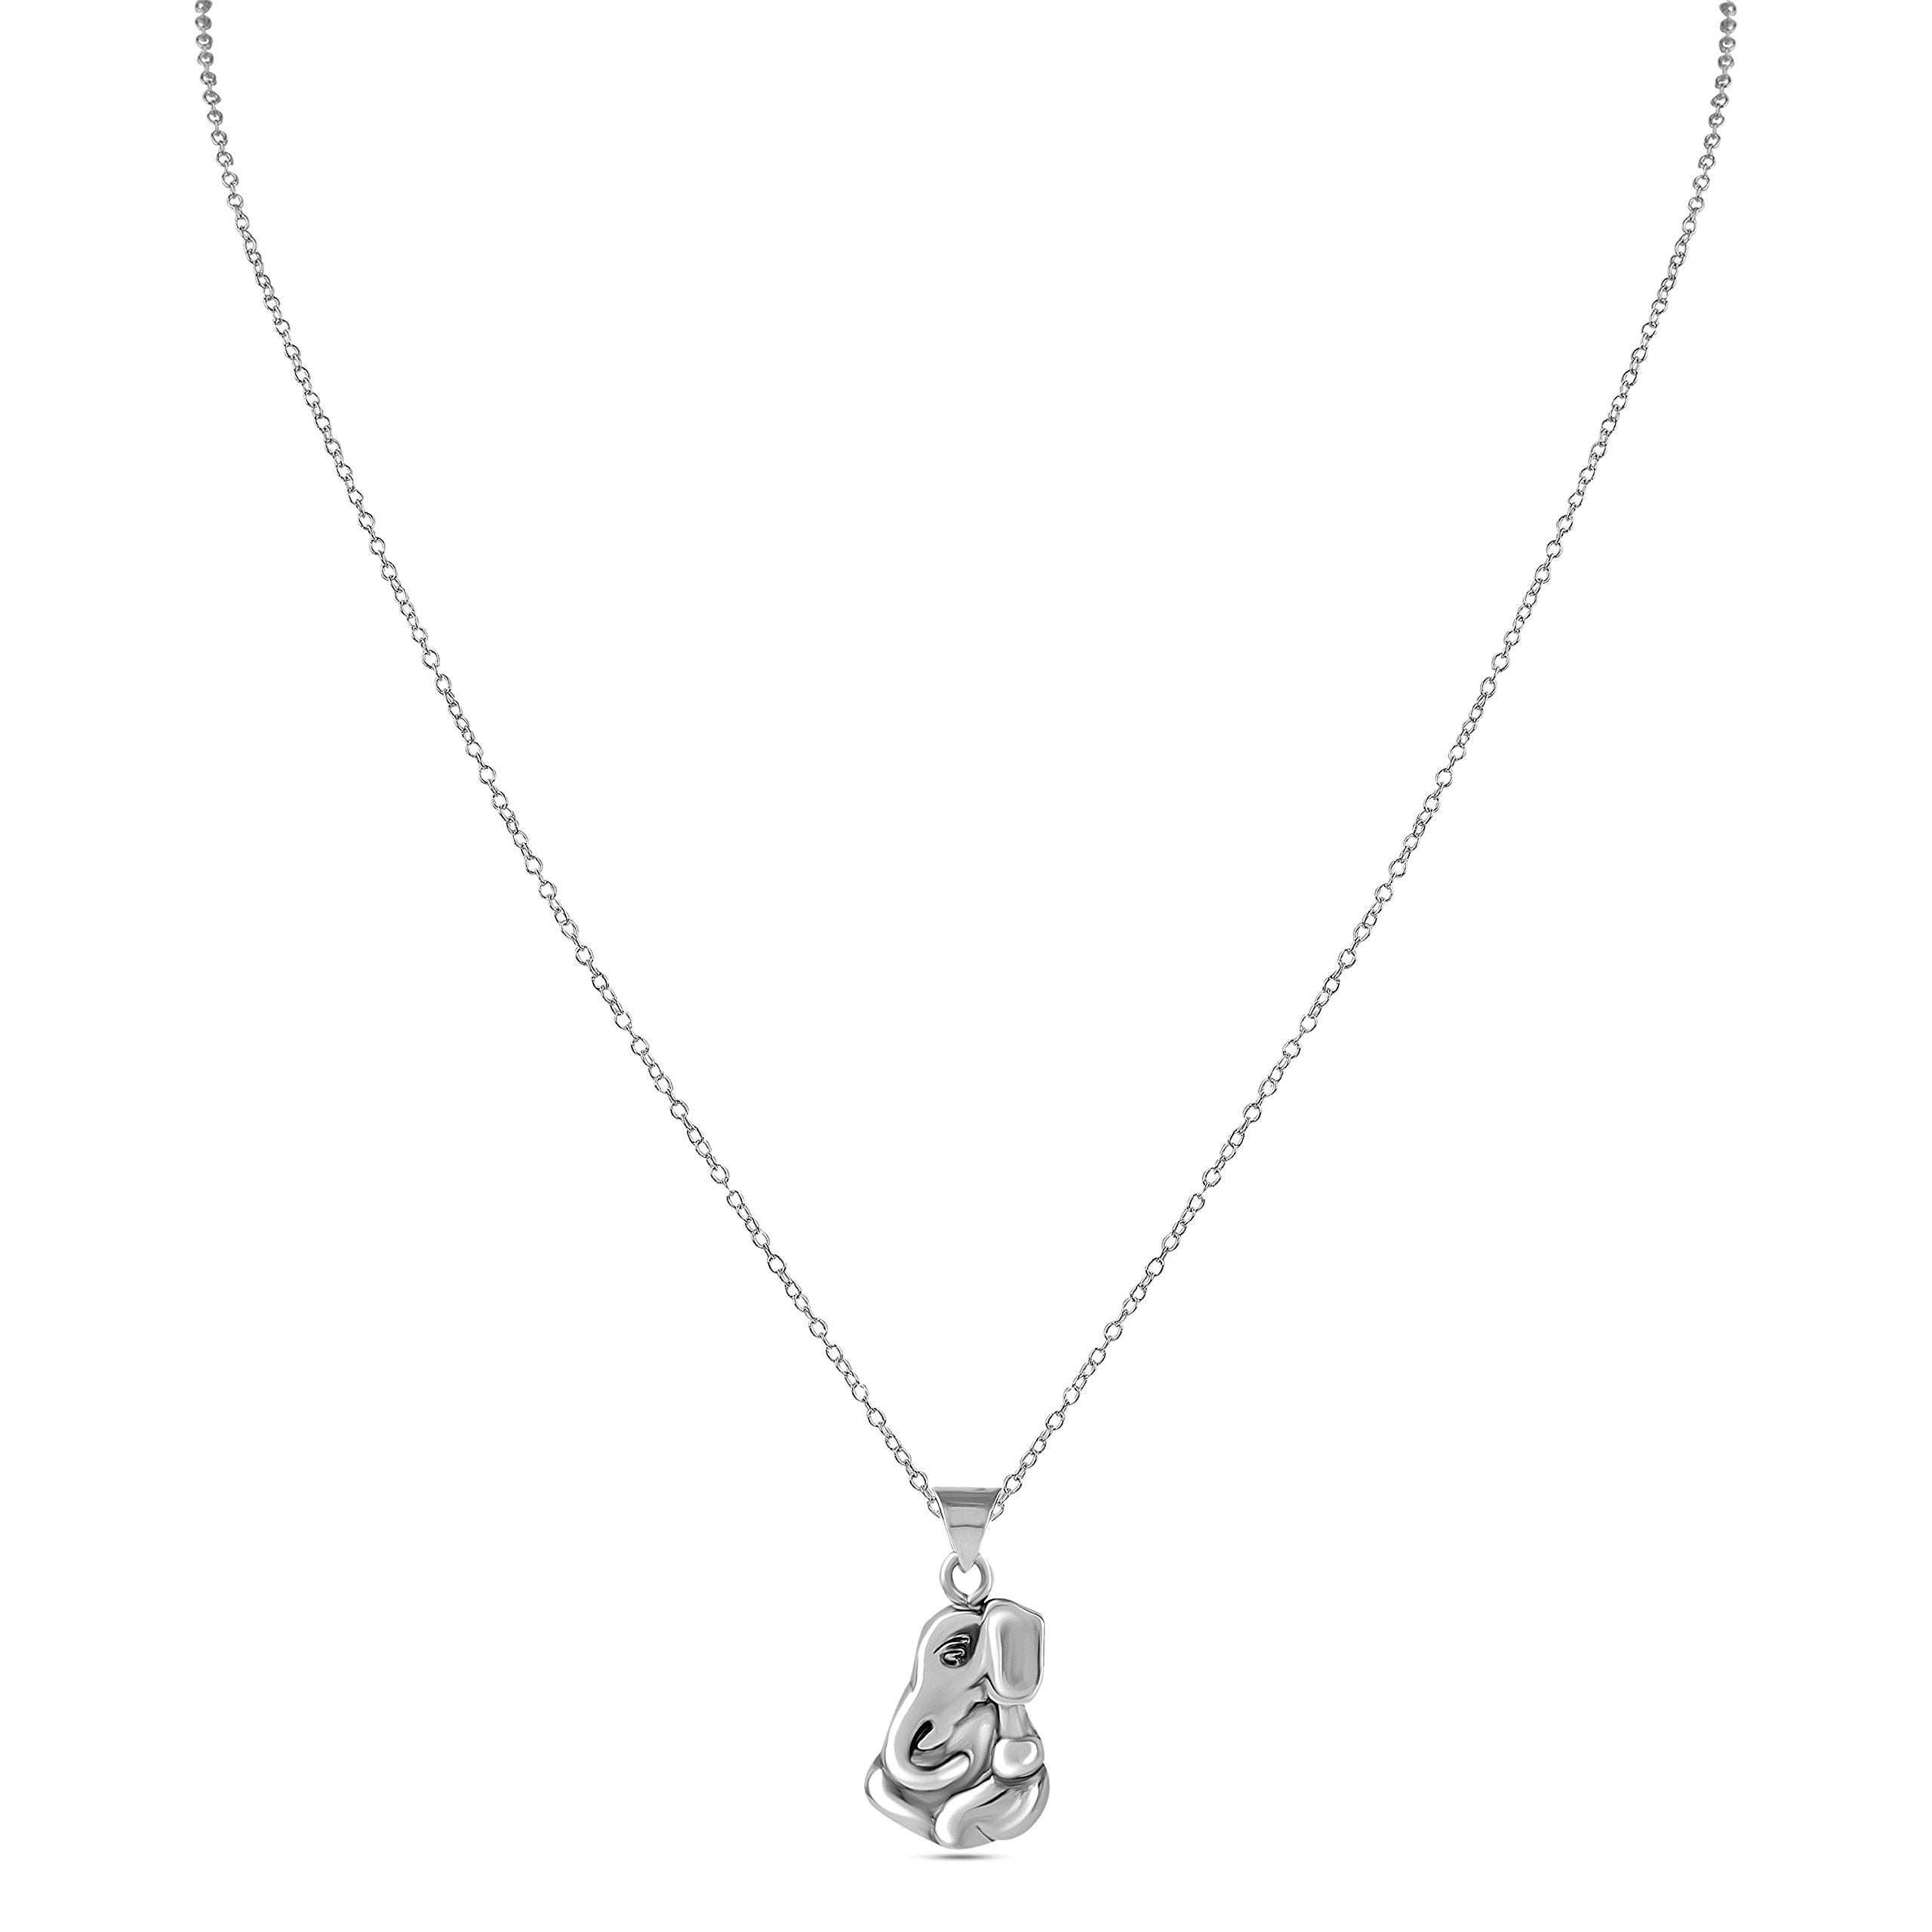 925 Sterling Silver Oxidized Ganesha Cable Chain Pendant Necklace for Men Women